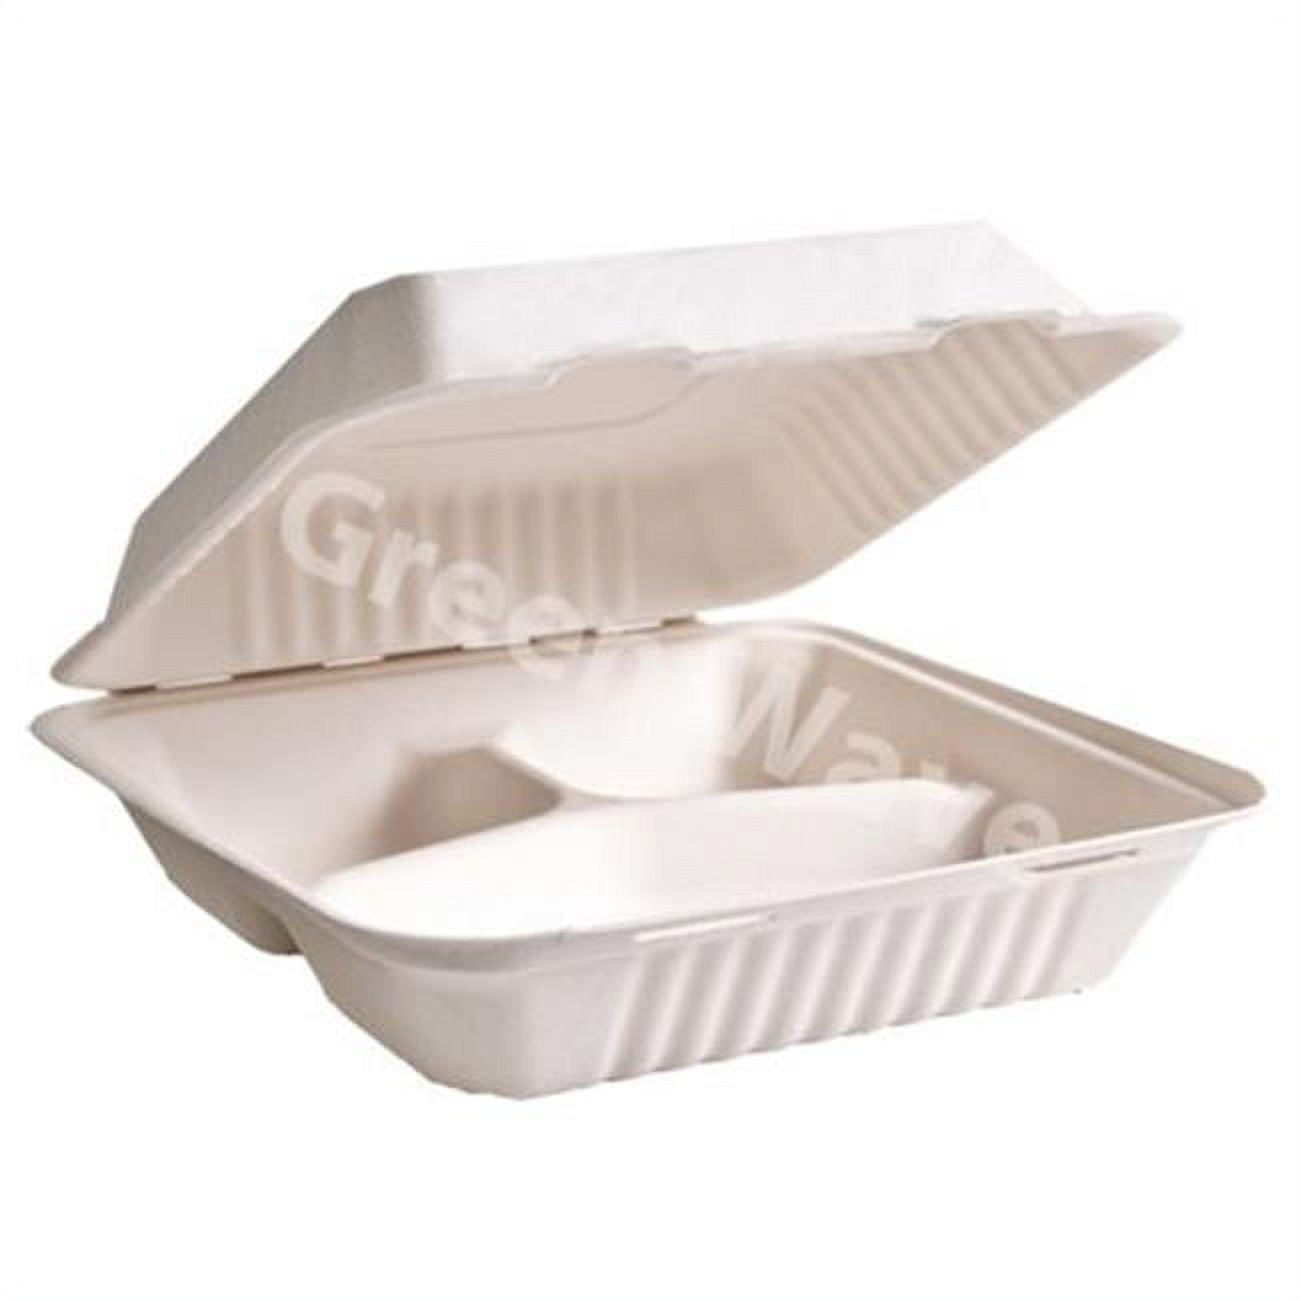 Tw-boo-013 Pe 9 X 9 X 3 In. 3 Compartment Bagasse Evolution Hinged Container, White